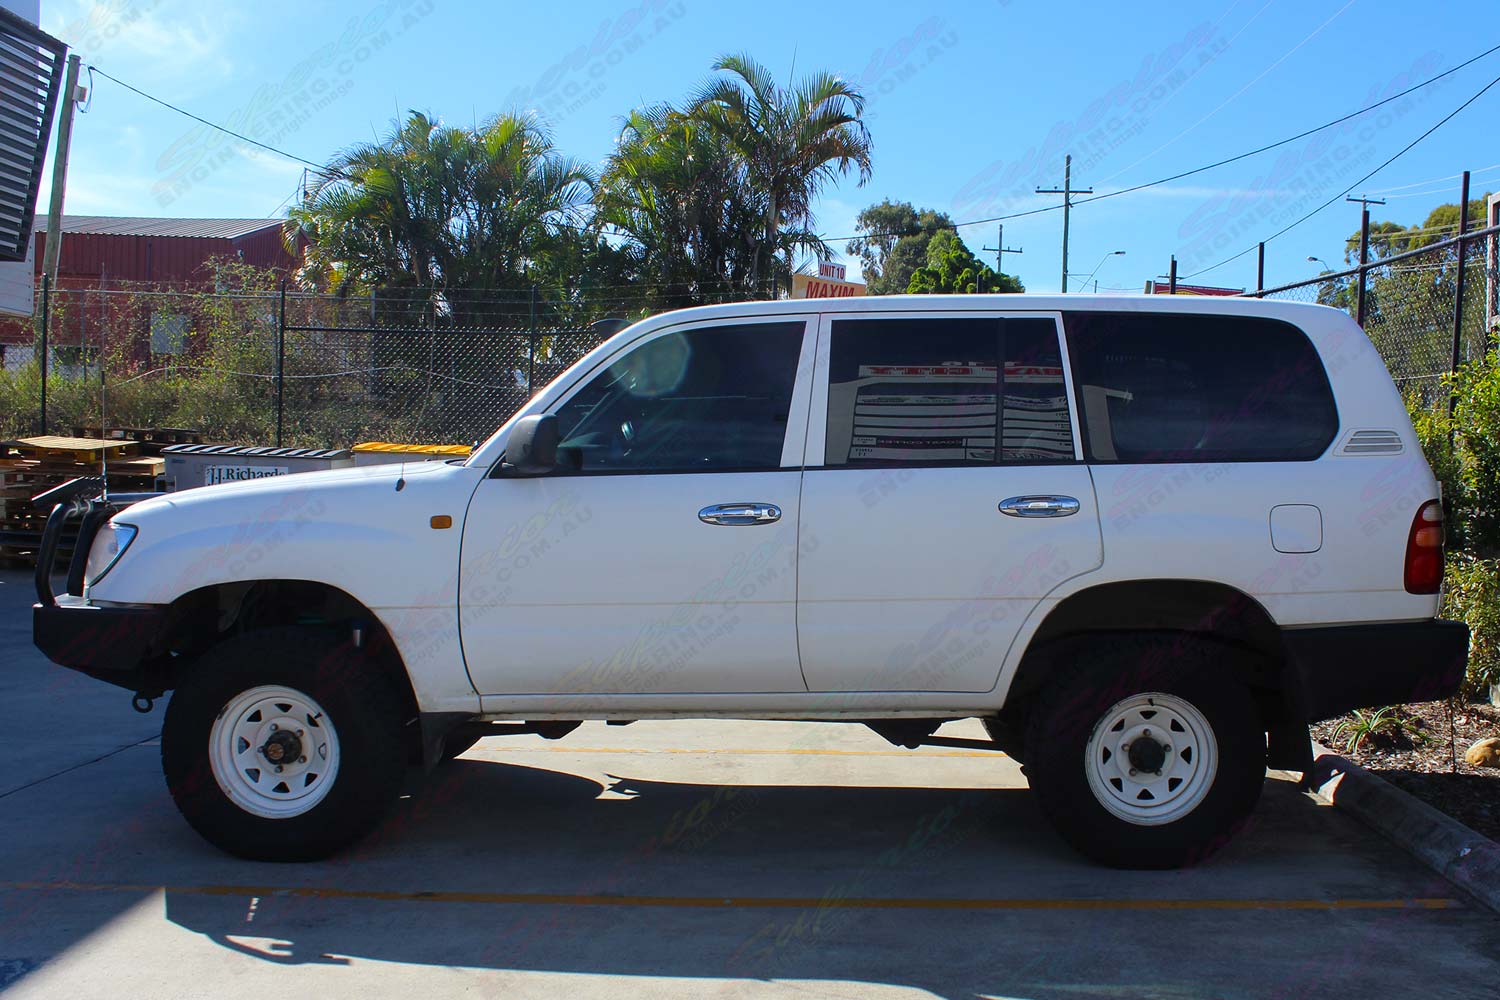 Left side view of a white 100 Series Toyota Landcruiser after being fitted with a heavy duty 2 inch Superior nitro gas lift kit